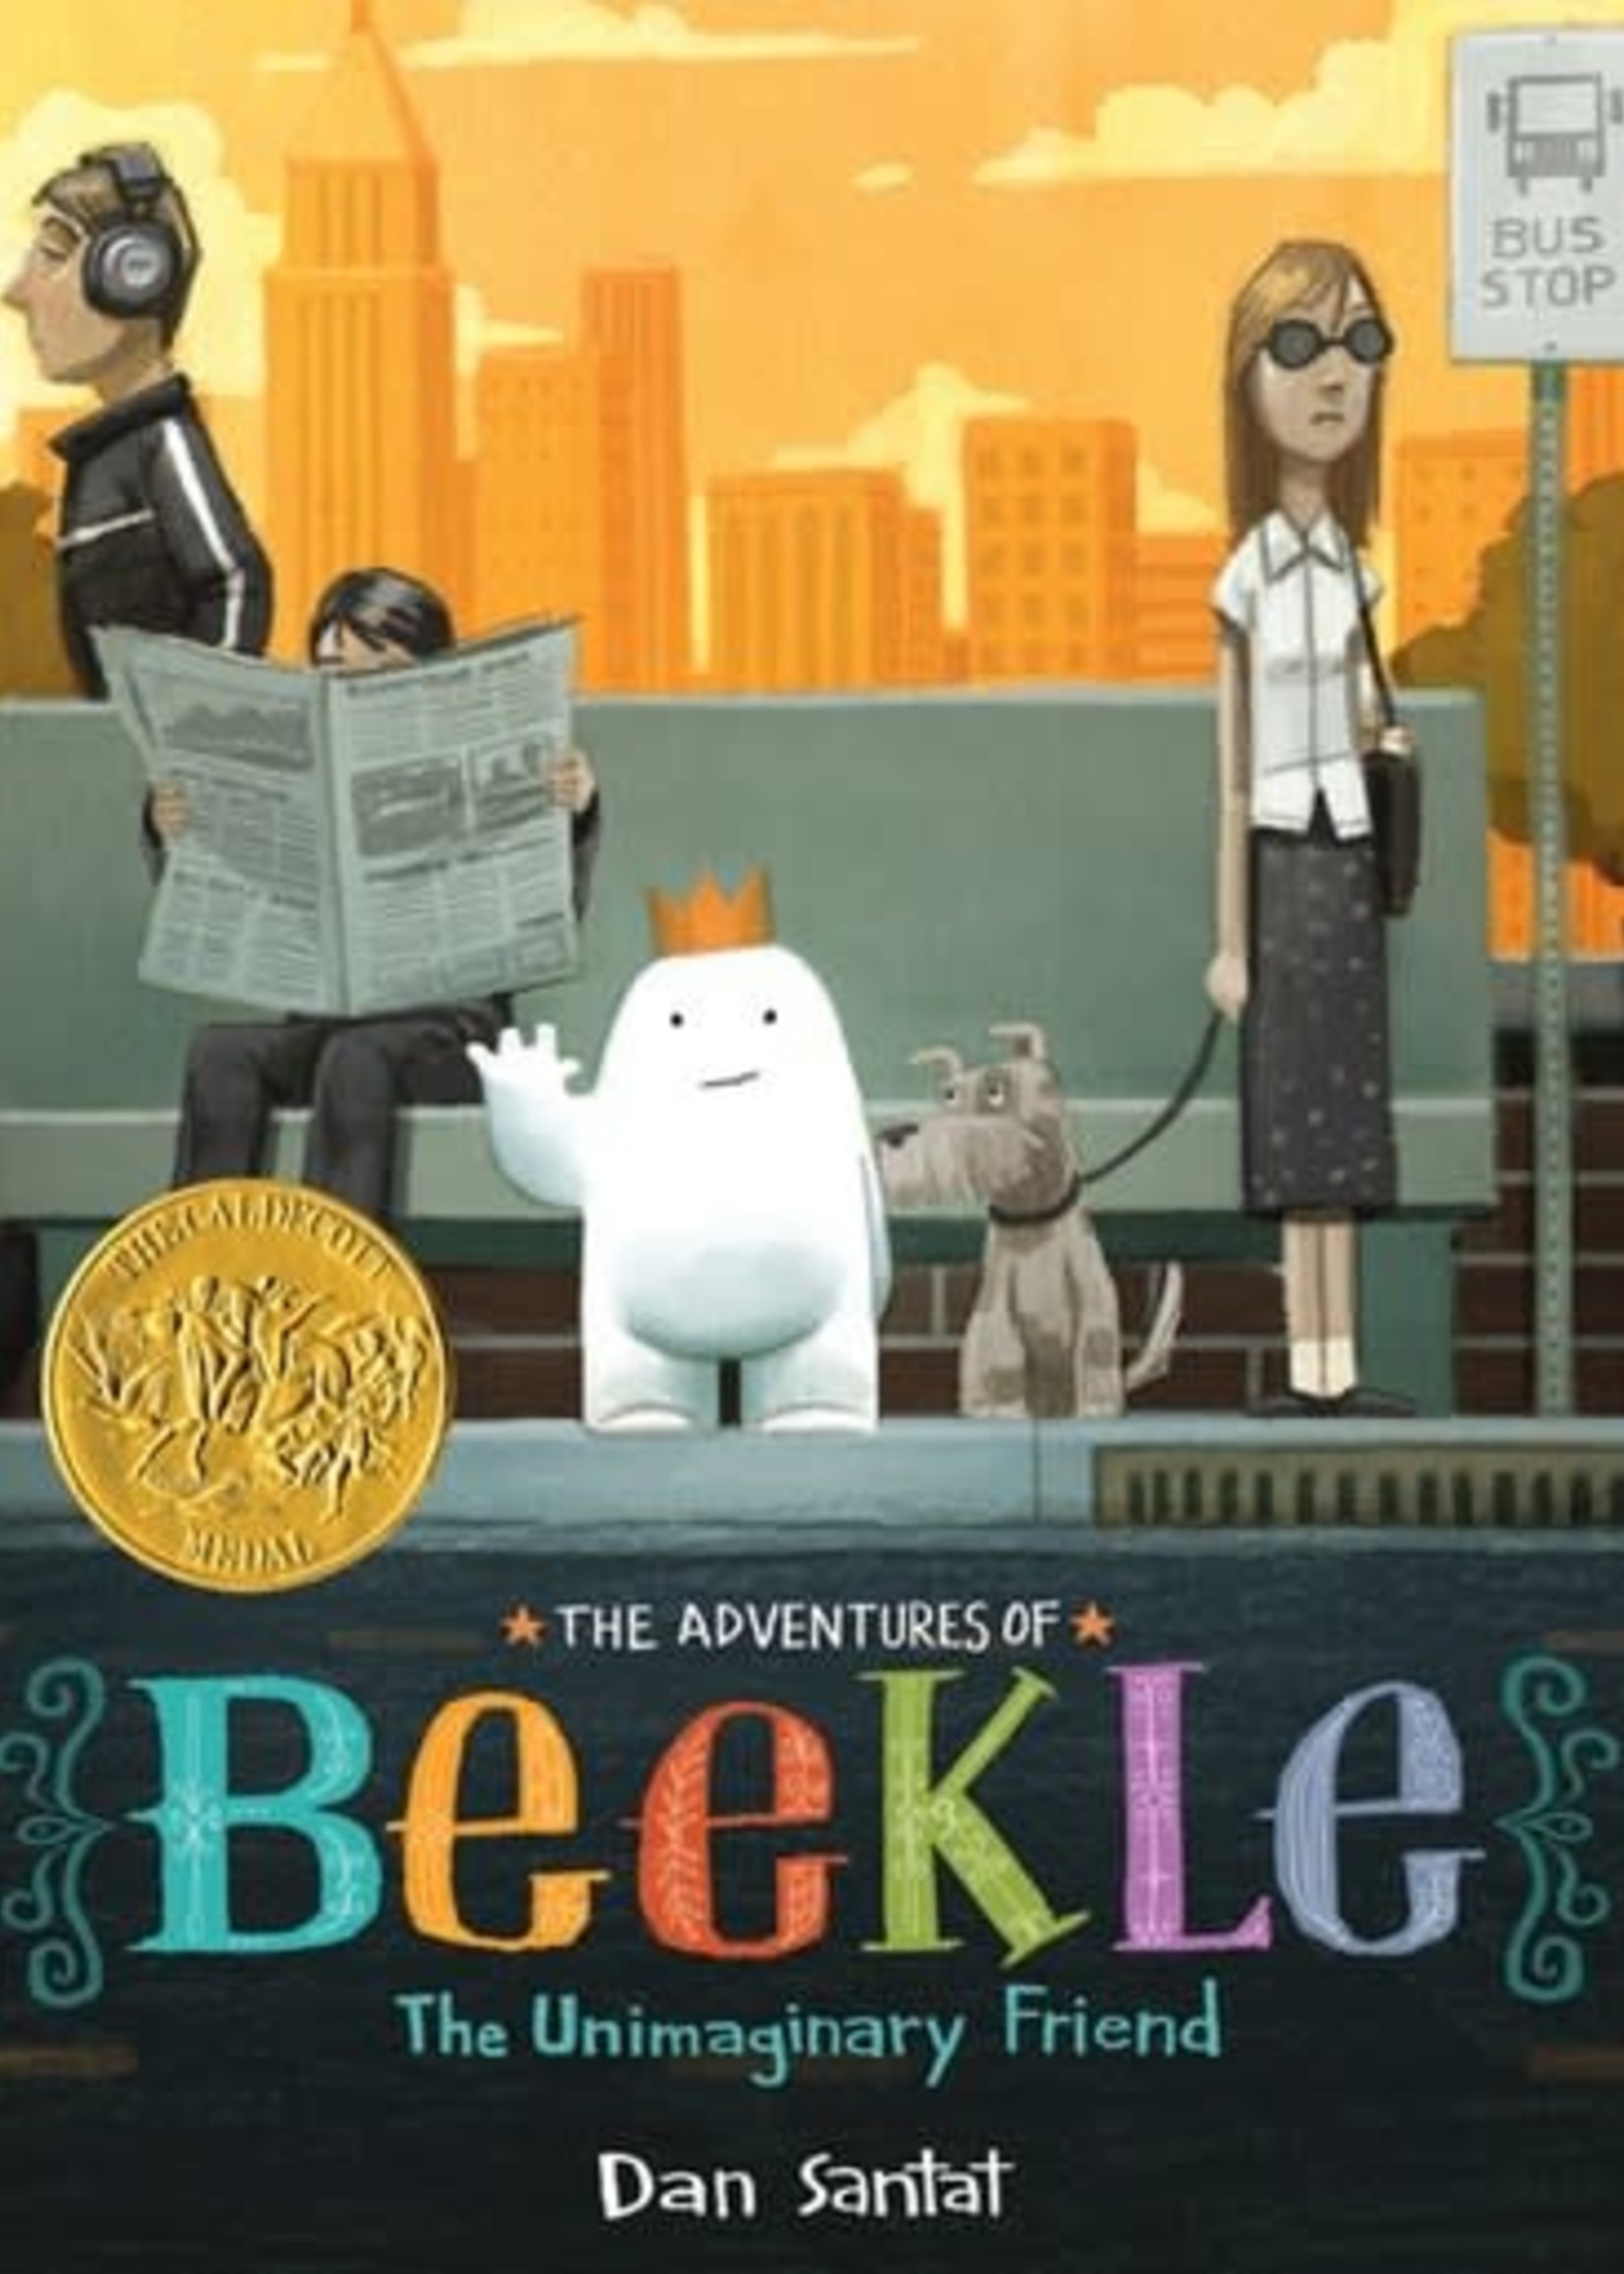 Little, Brown Books for Young Readers Adventures of Beekle: The Unimaginary Friend